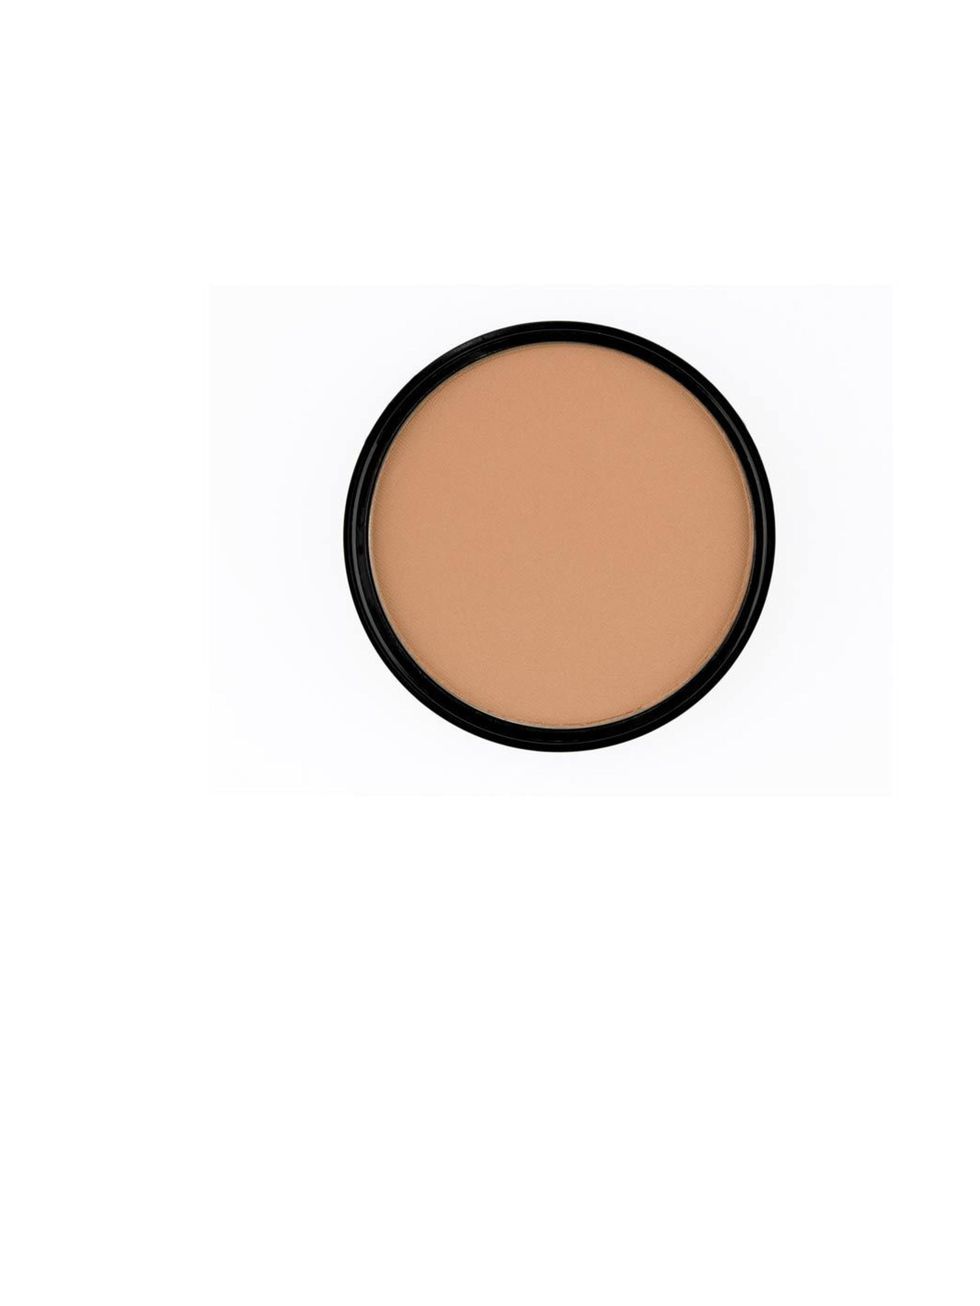 <p><a href="http://www.smashbox.co.uk/product/6033/17811/Face/Bronzer/BRONZE-LIGHTS/MSNs-33-BEST-Beauty-Products/index.tmpl">Smashbox</a> Bronze Lights bronzer, £23</p>